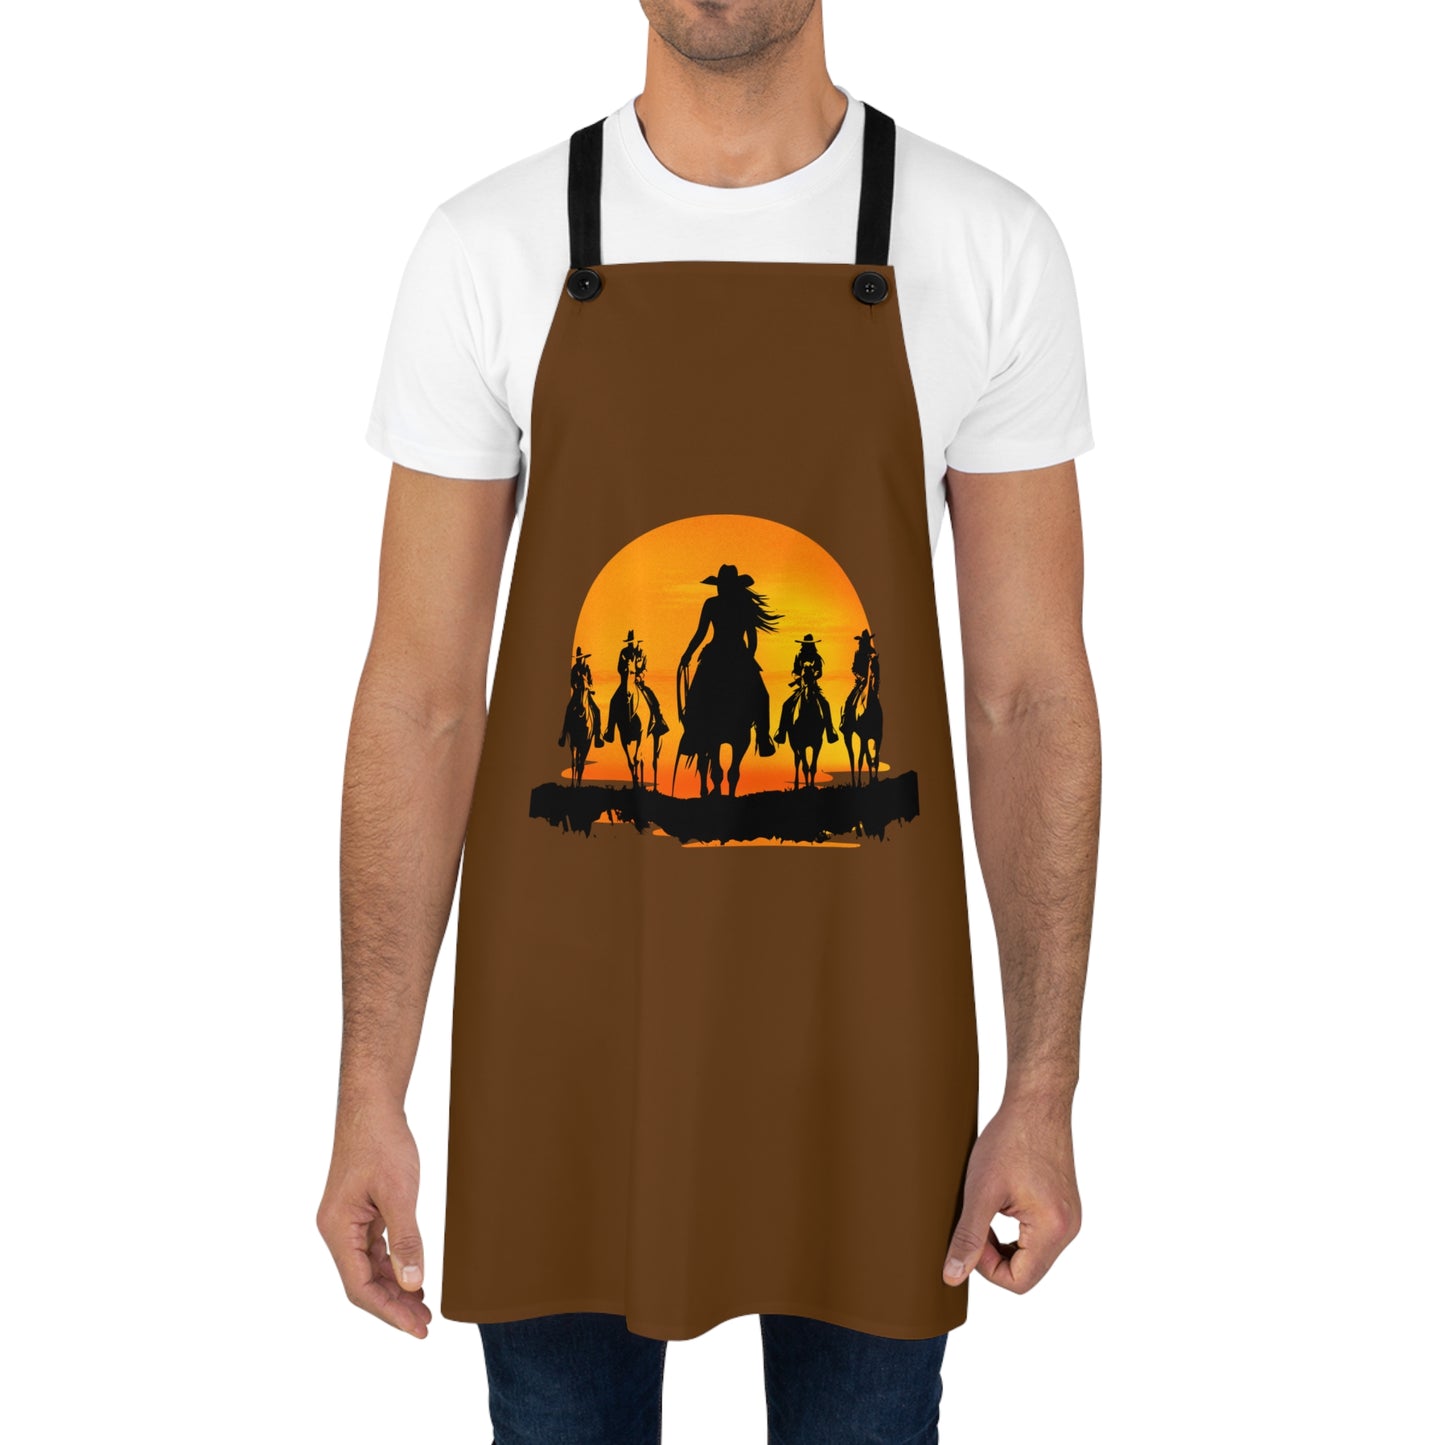 Cowgirls In The Sunset Apron (AOP)